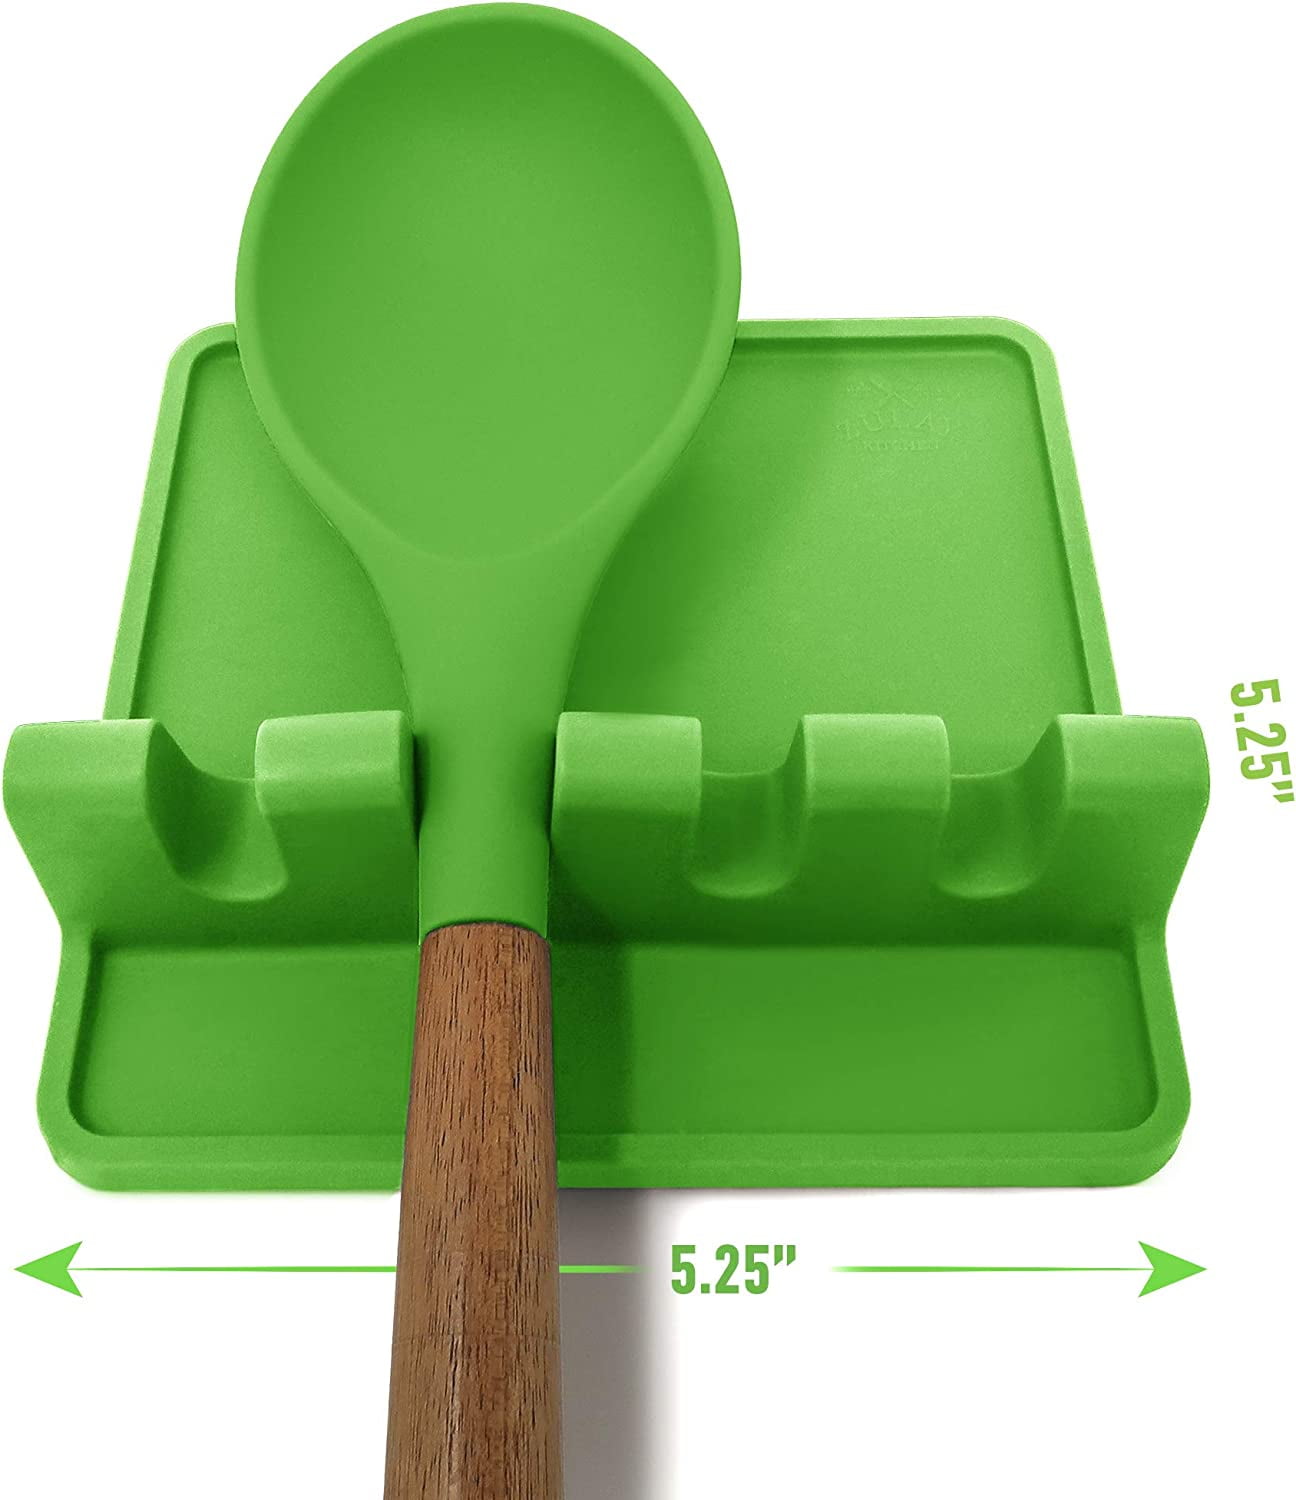 Dropship 1/2pcs Silicone Utensil Rest With Drip Pad For Multiple Utensils;  Heat-Resistant; Spoon Rest & Spoon Holder For Stove Top; Kitchen Utensil  Holder For Ladles; Tongs & More to Sell Online at